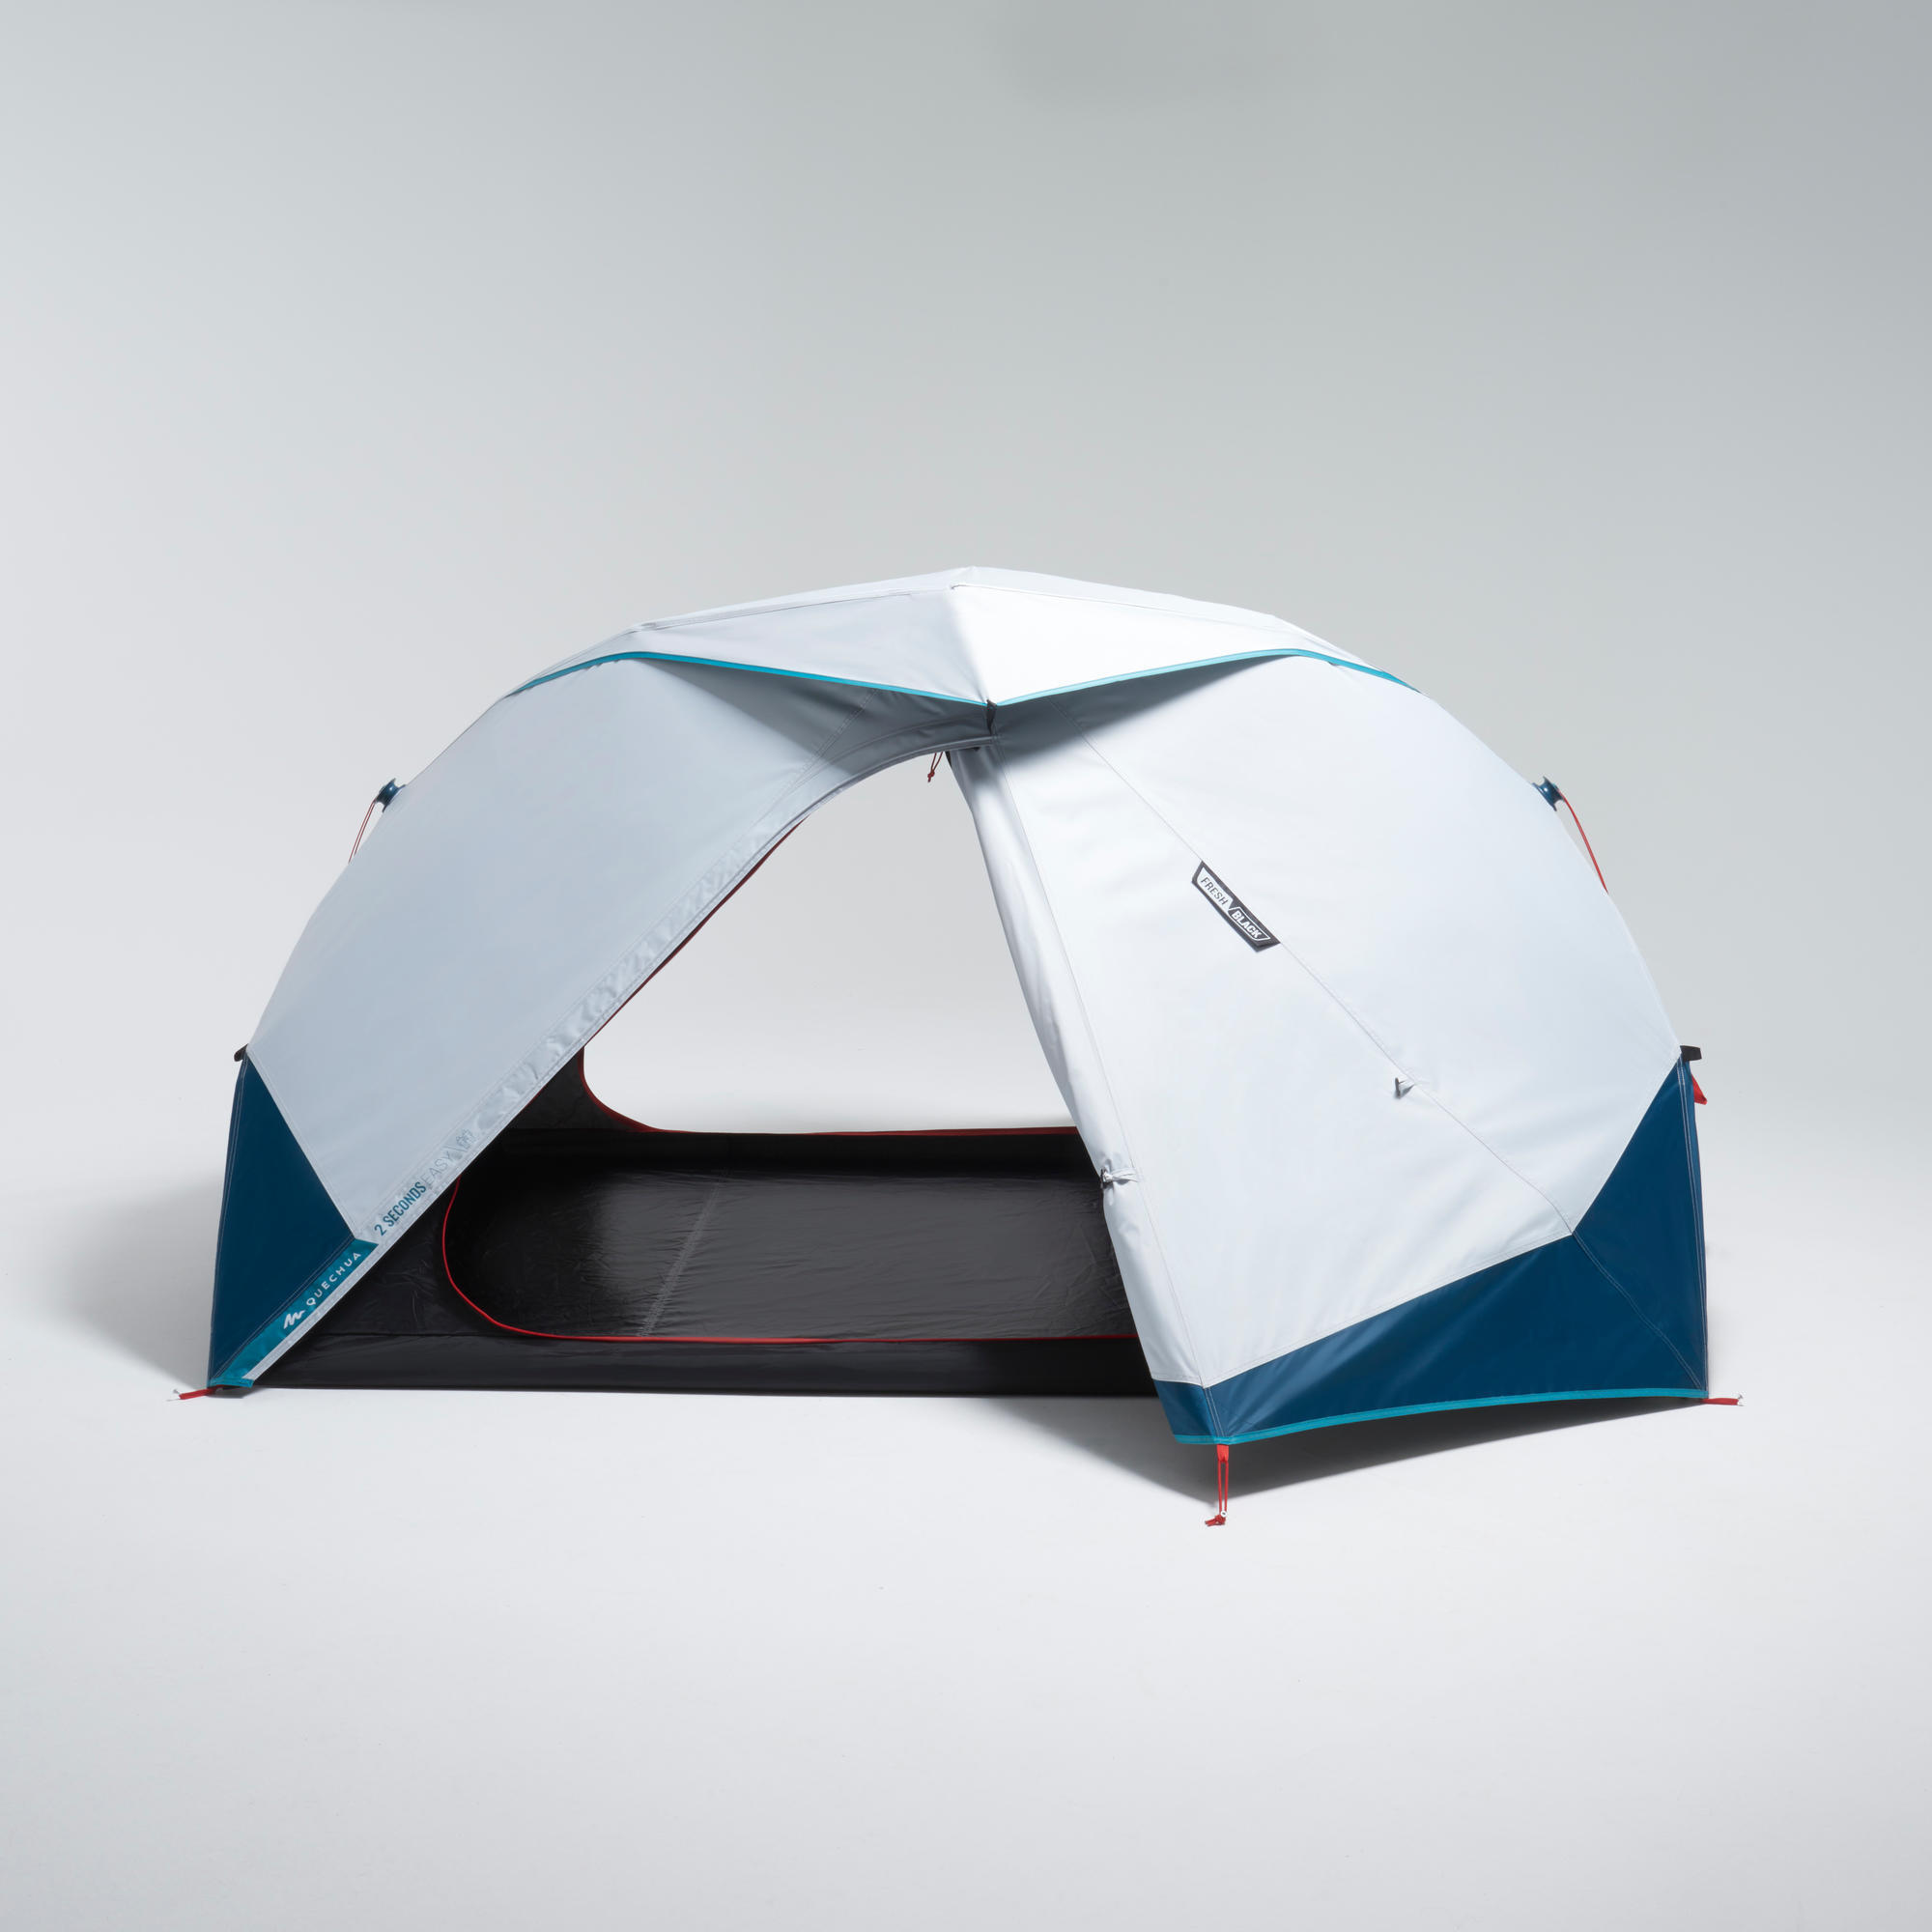 2 seconds fresh & black camping tent